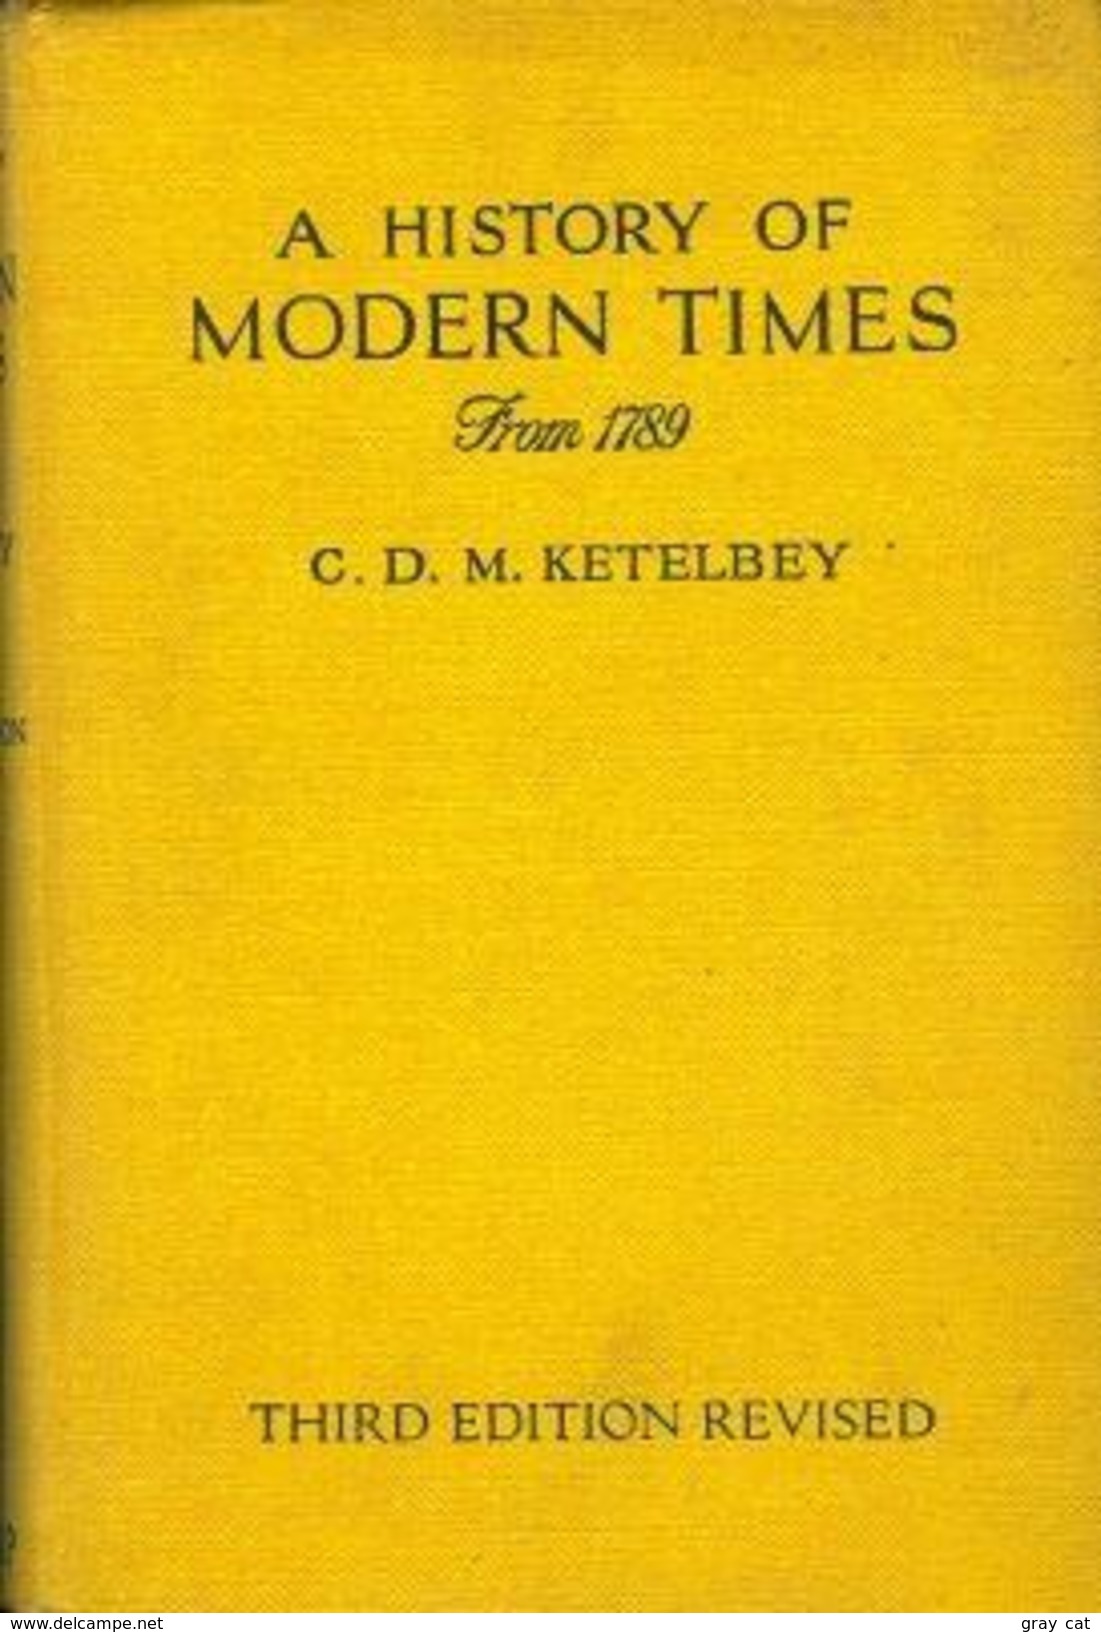 A History Of Modern Times From 1789 (Third Edition) By C. D. M. Ketelbey - Wereld